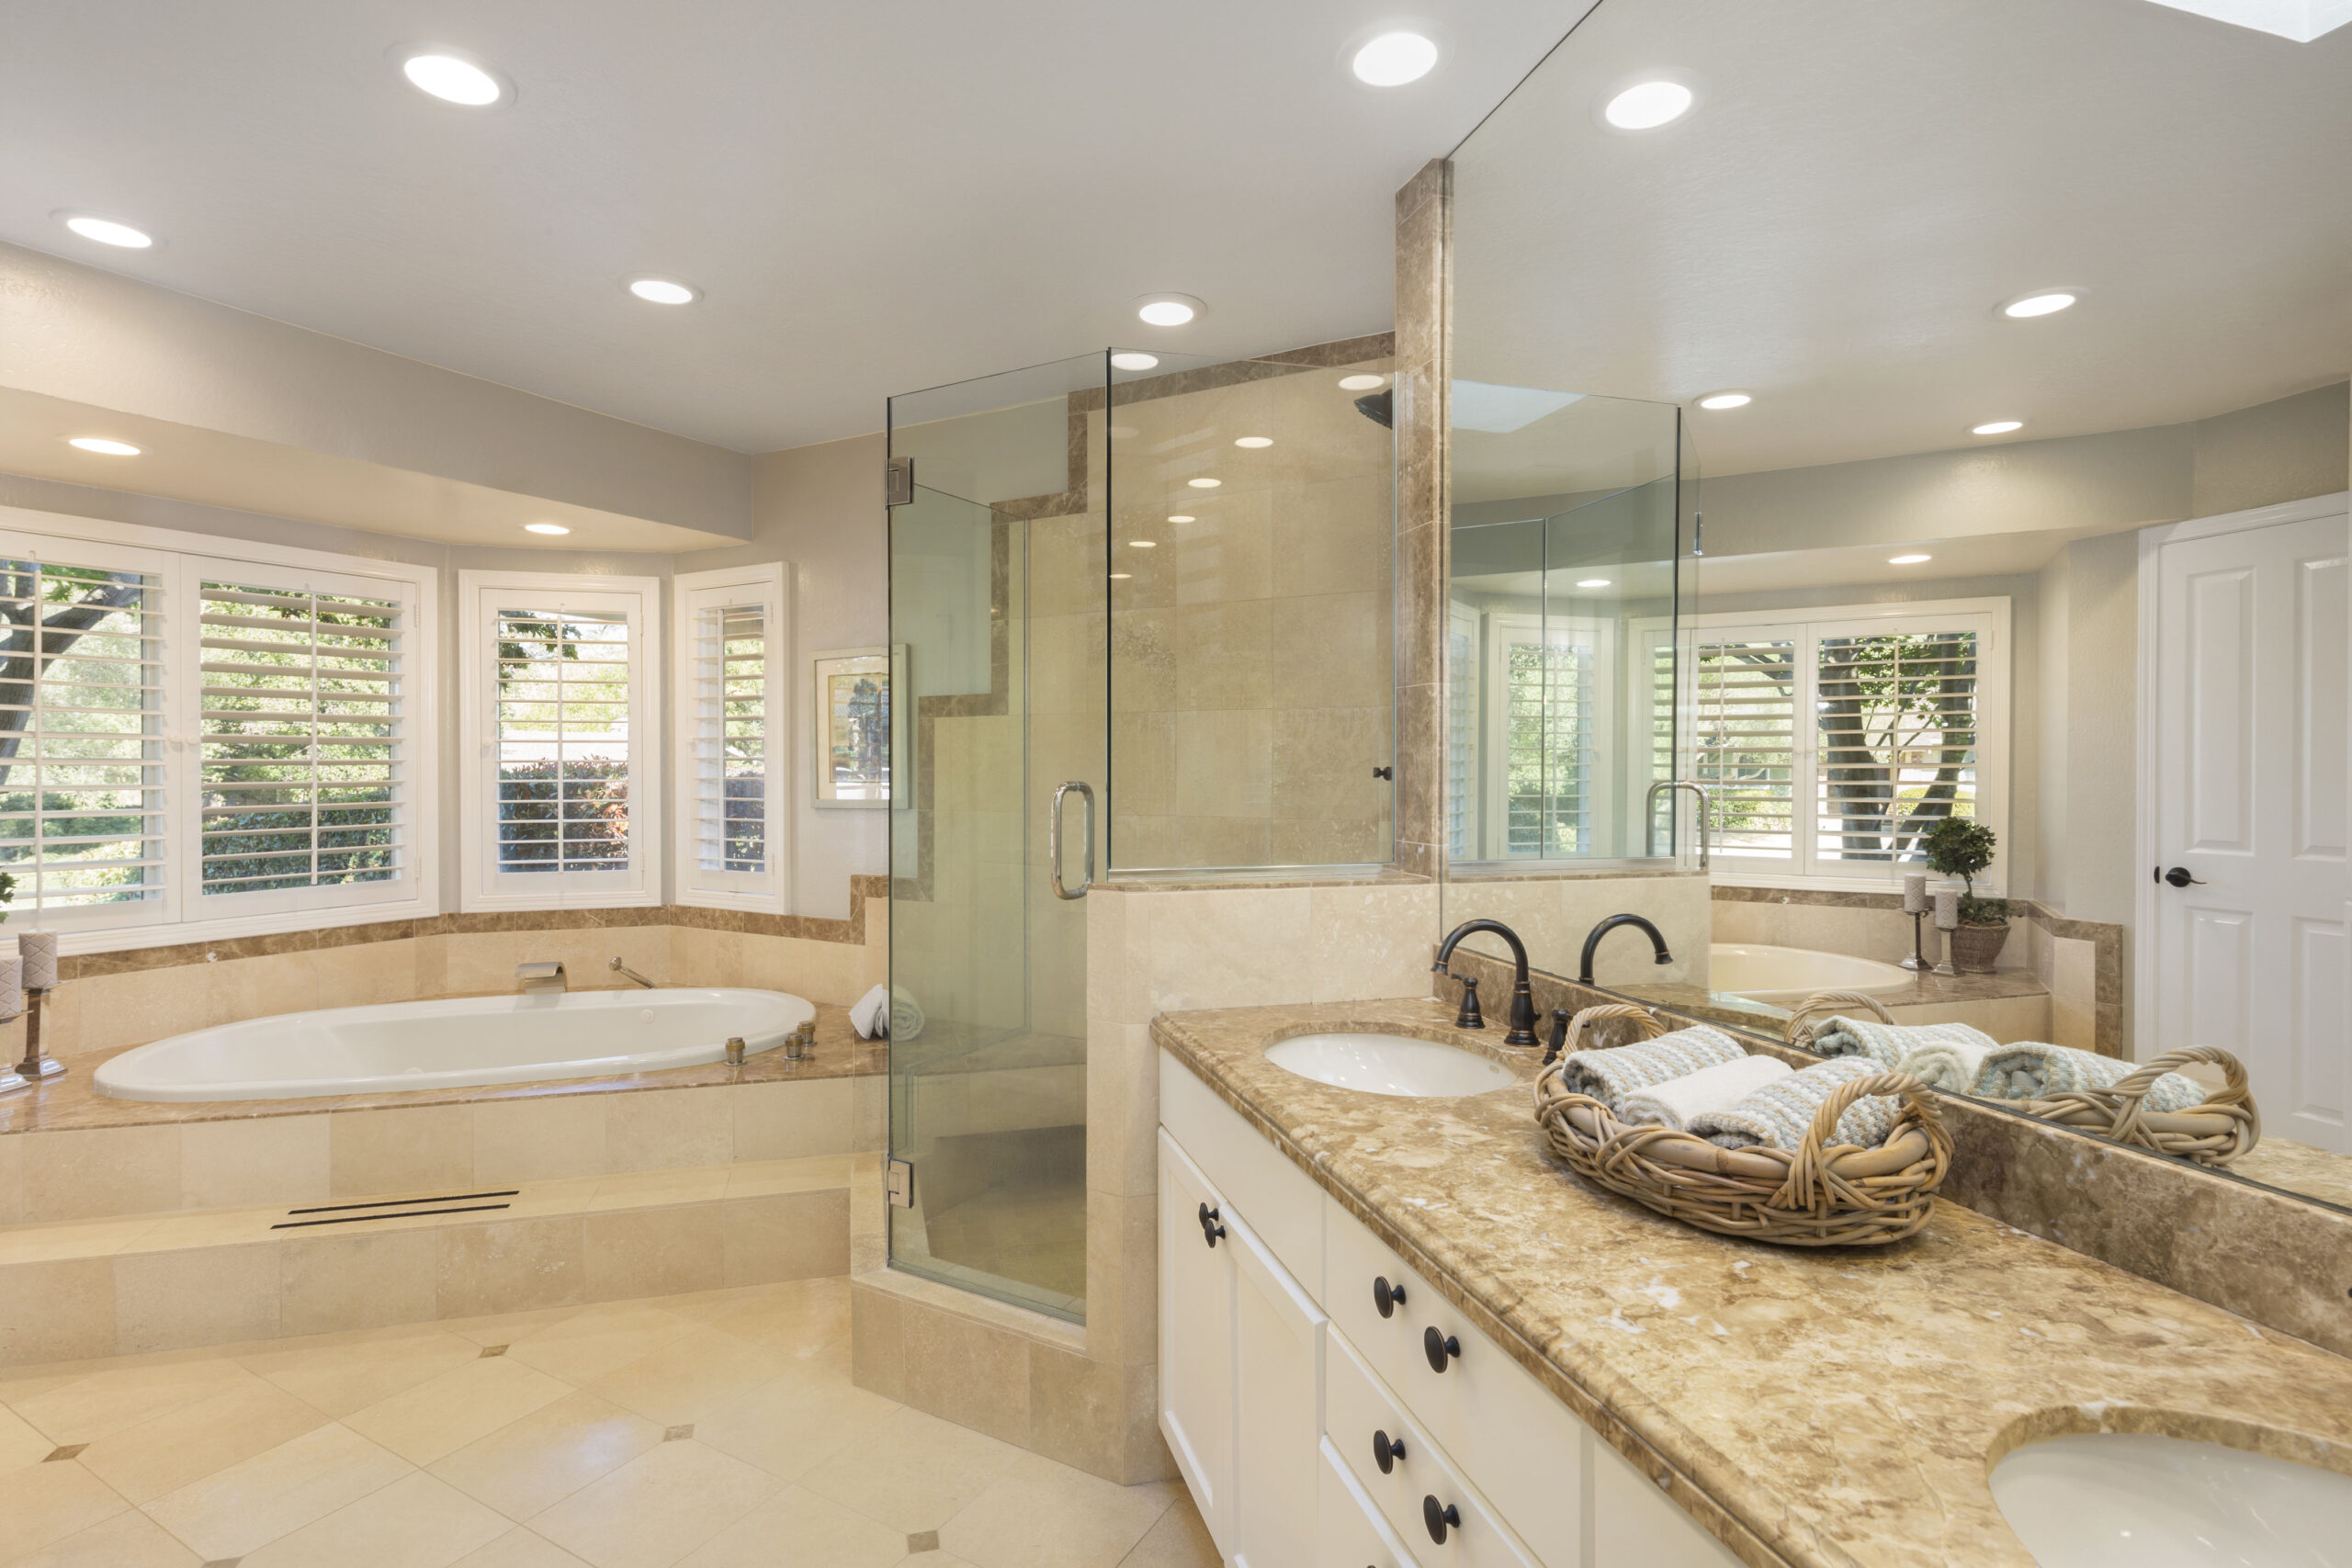 6 Benefits of Renovating Your Shower With Tiles